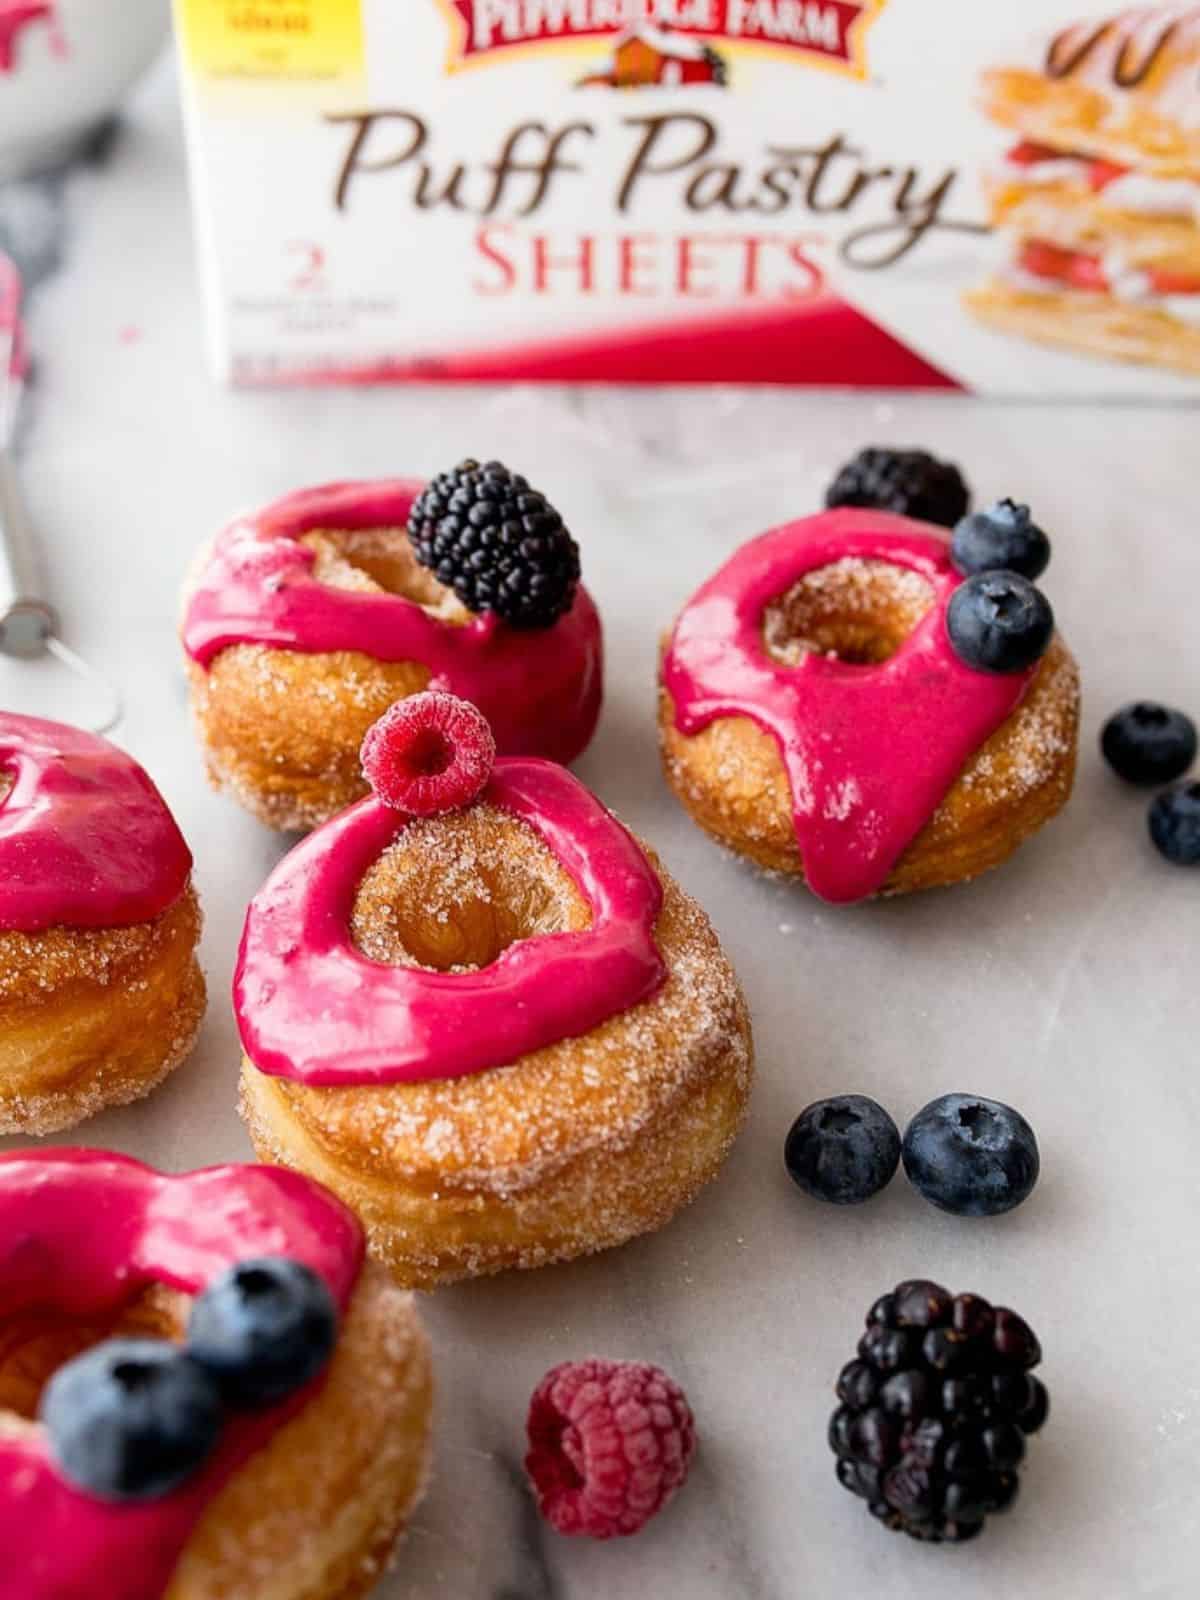 Puff pastry donuts with pink frosting, fresh berries and box of puff pastry in background.